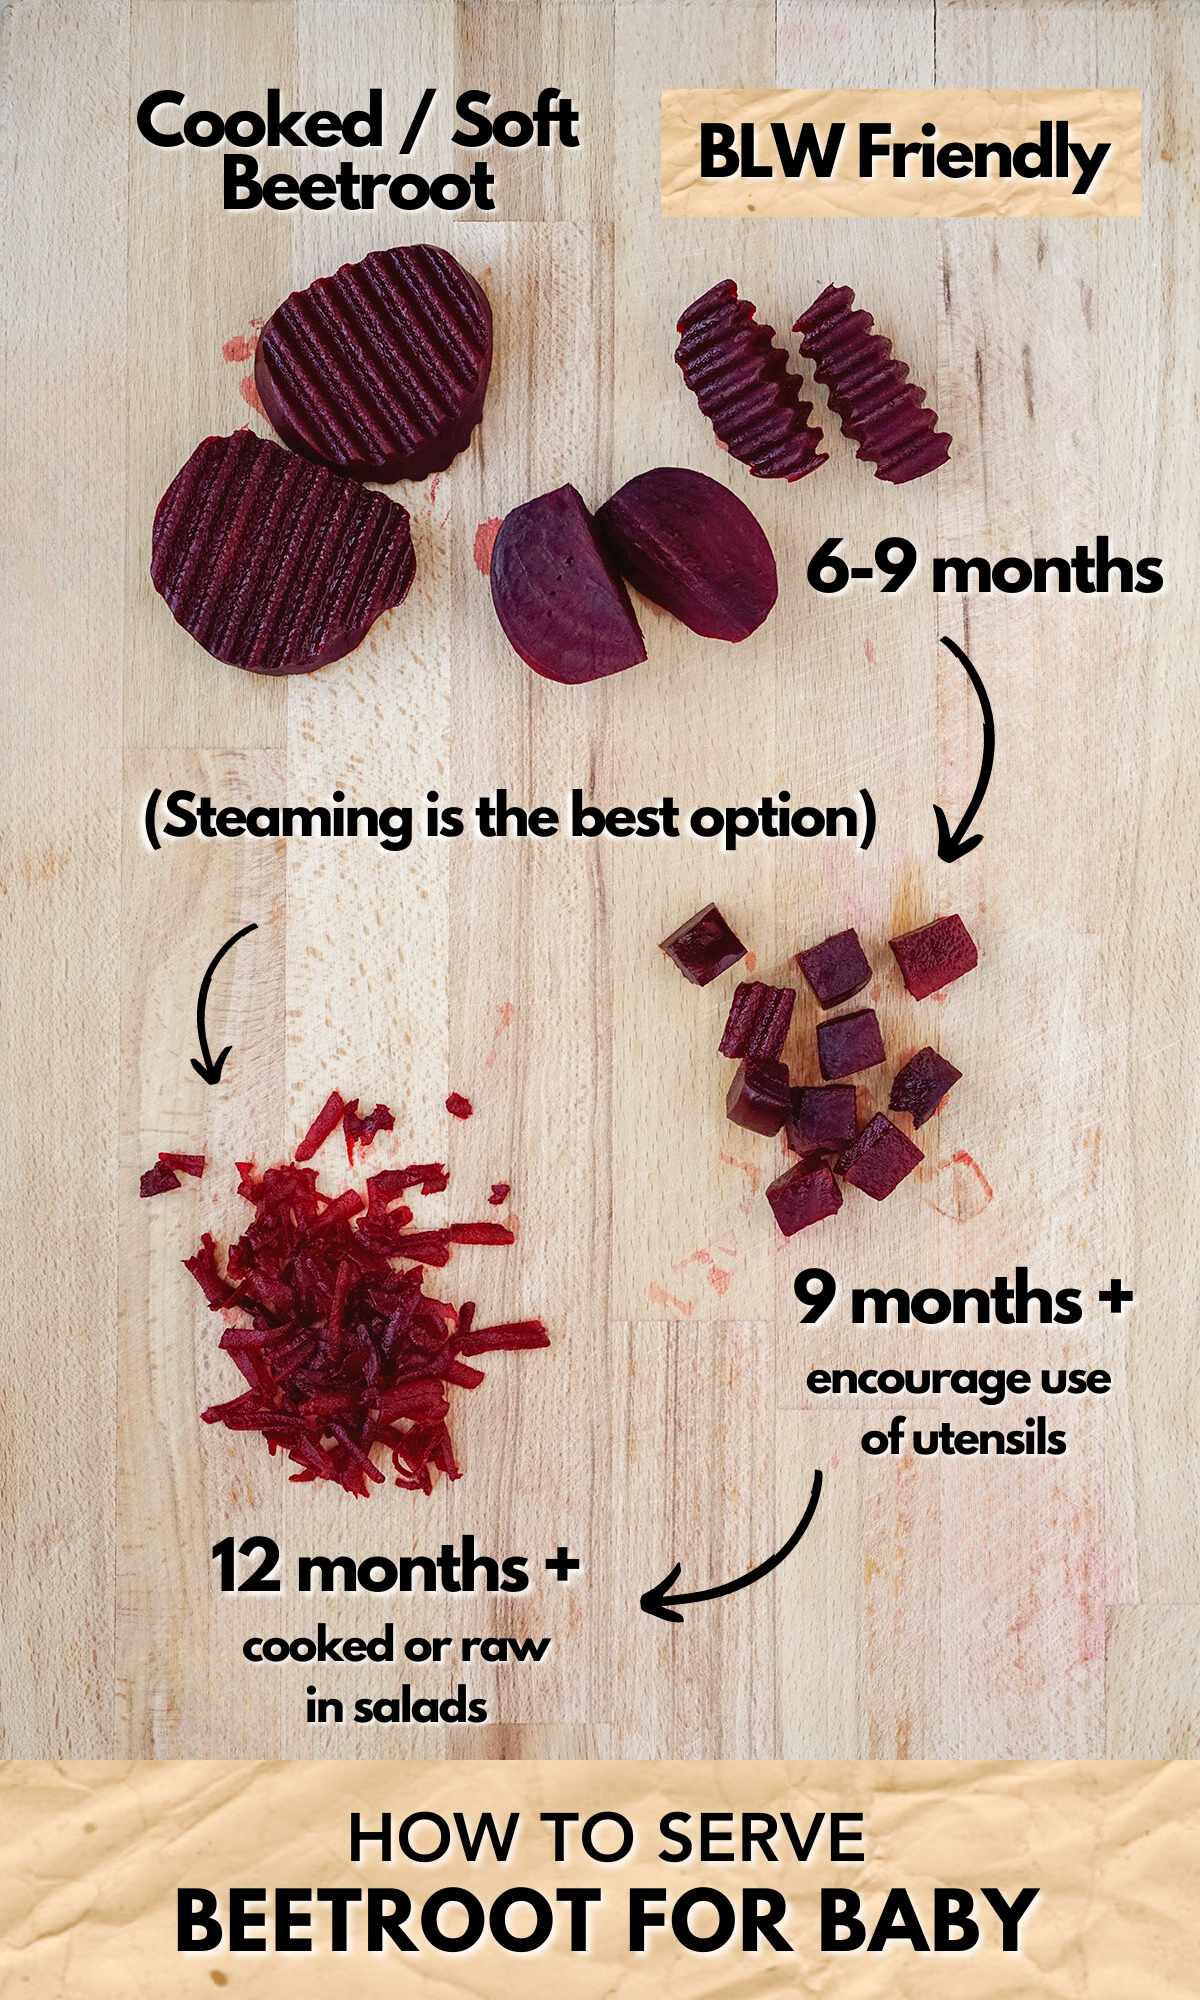 Image showing how to cut beetroot for baby led weaning by age.